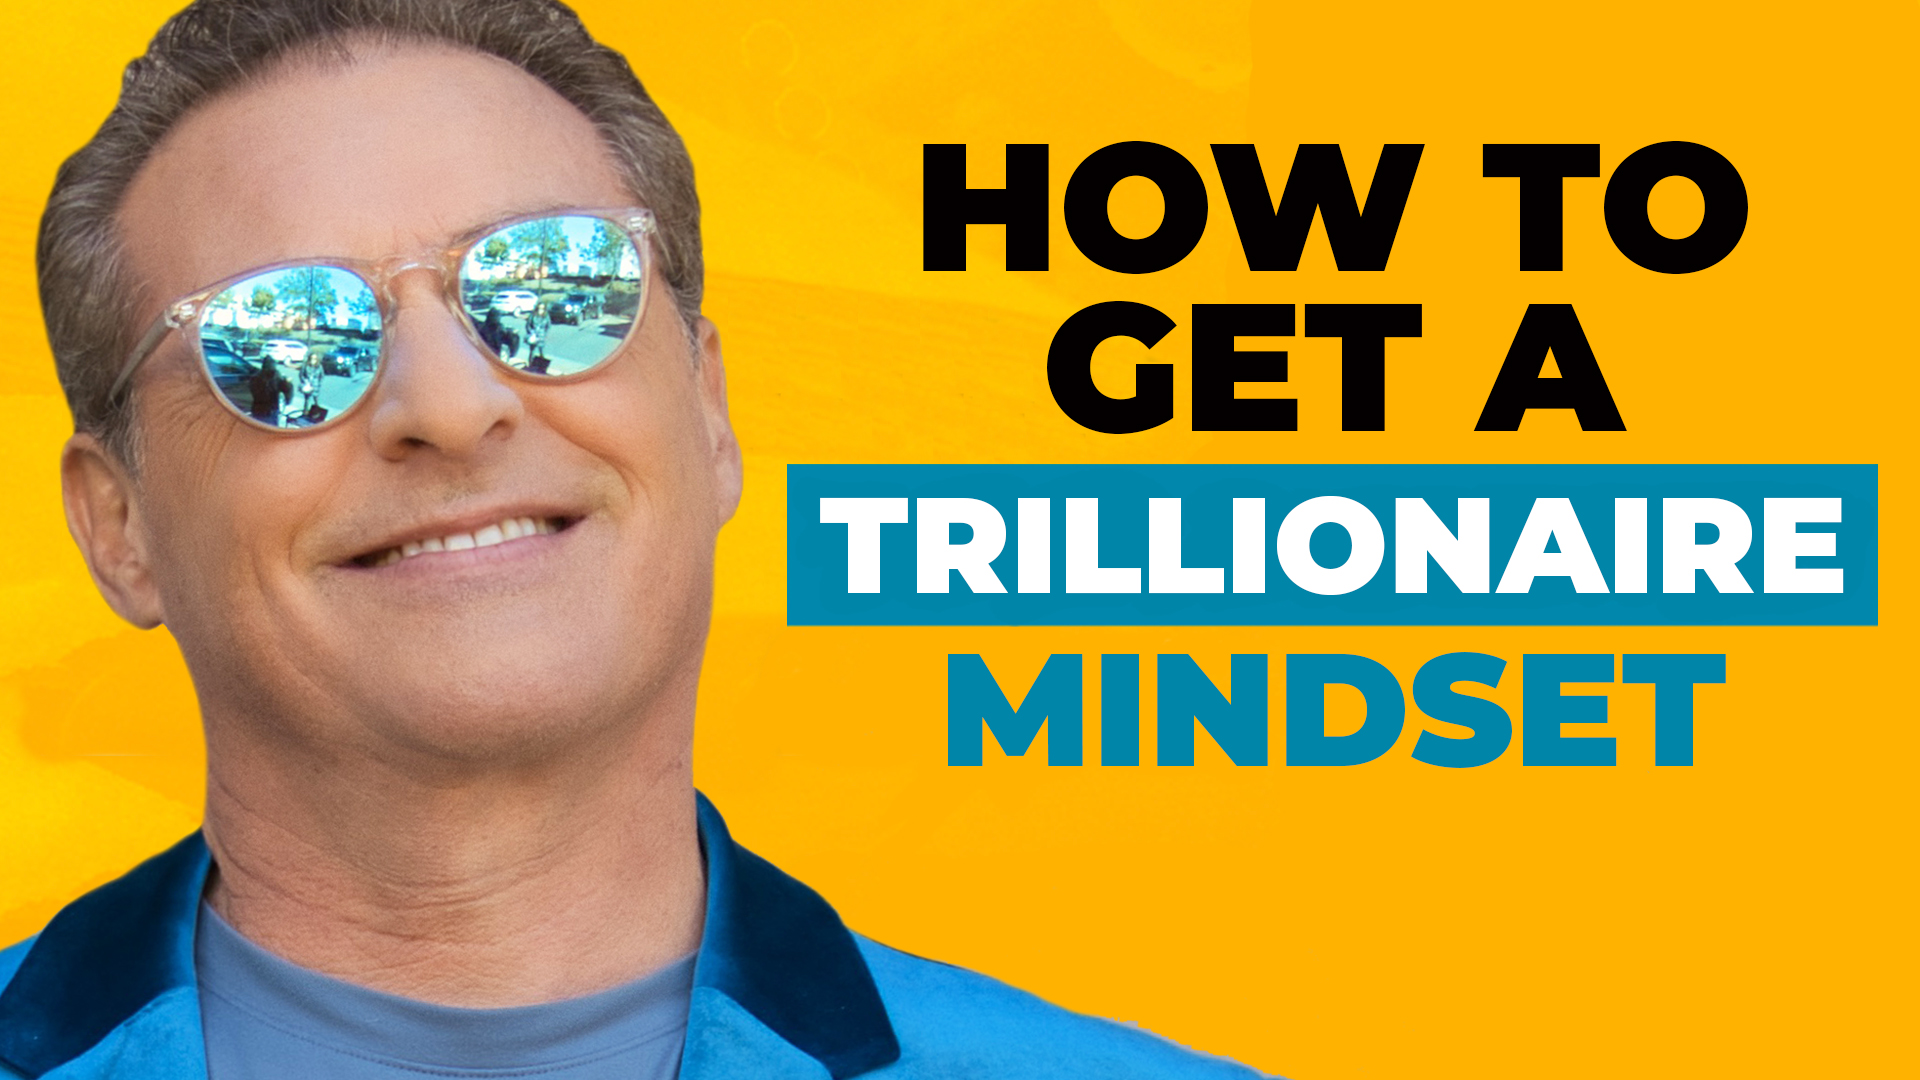 Headshot of Mike Koenigs on a bold yellow background, along with text reading "How To Get A Trillionaire Mindset."